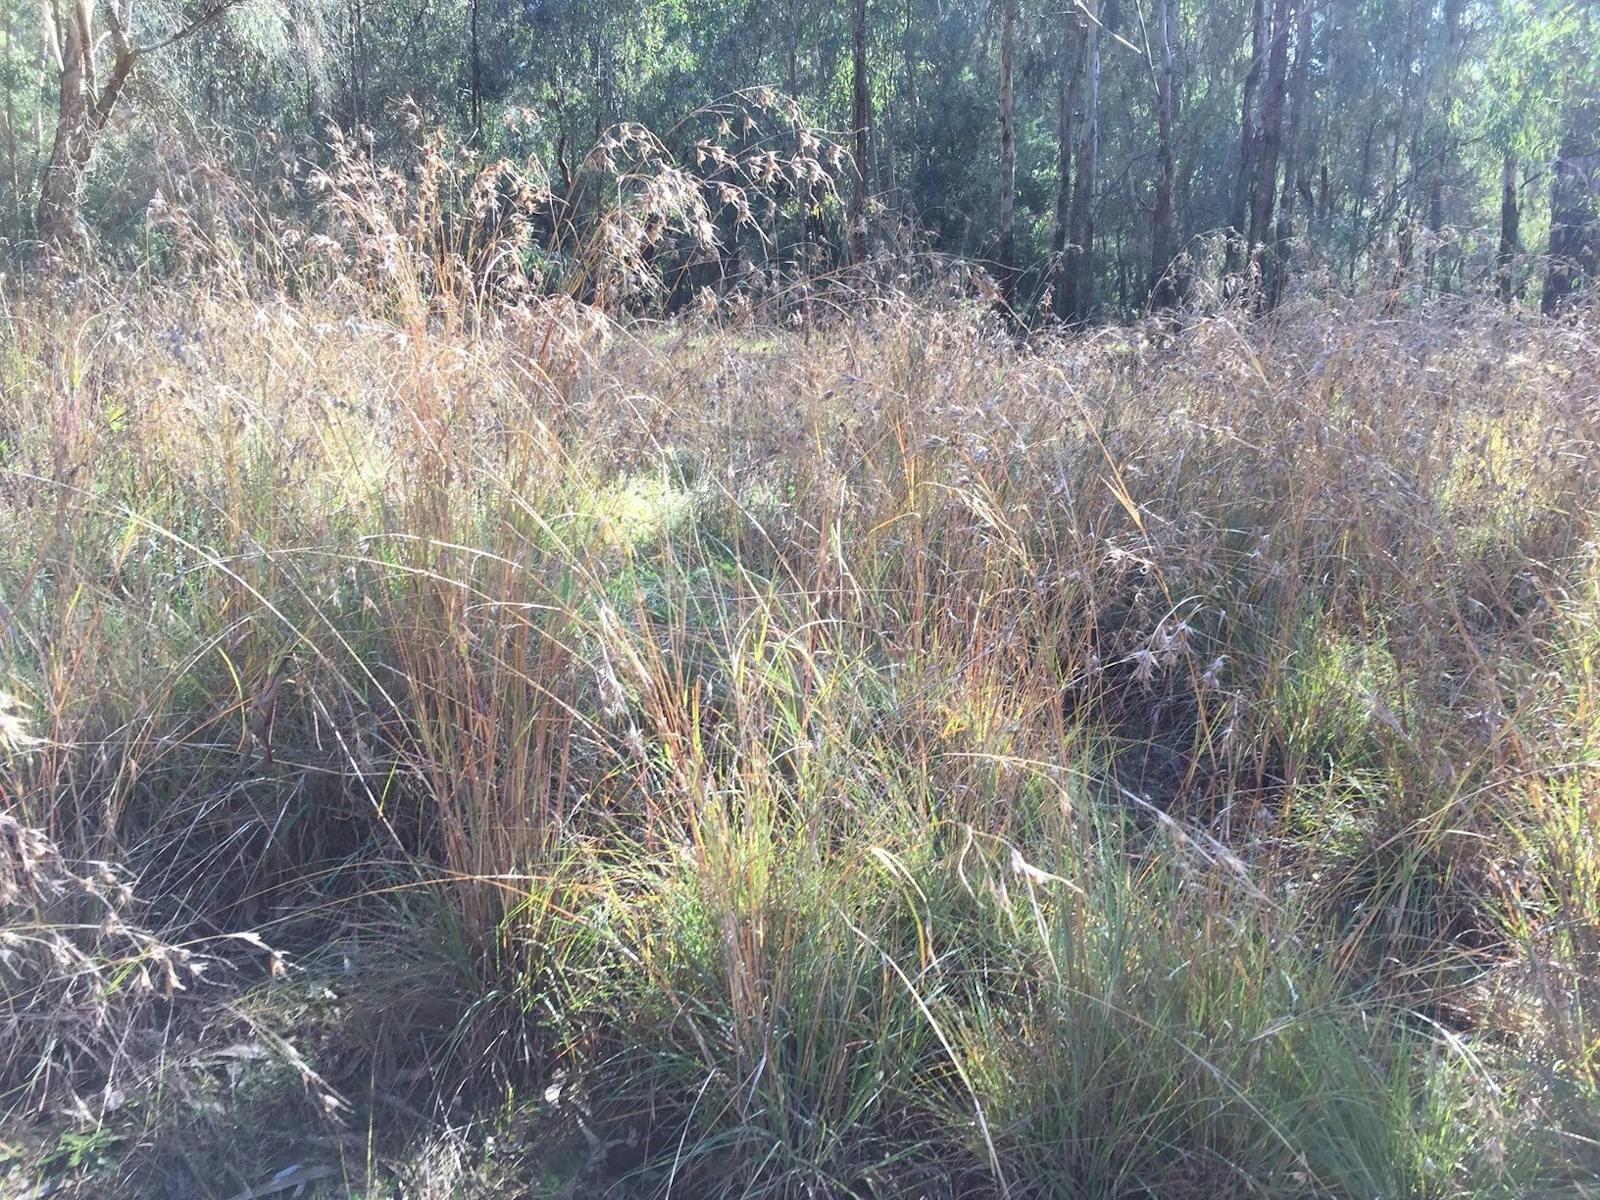 native grasses with sunlight filtering through creating brown, green and gold colors with trees